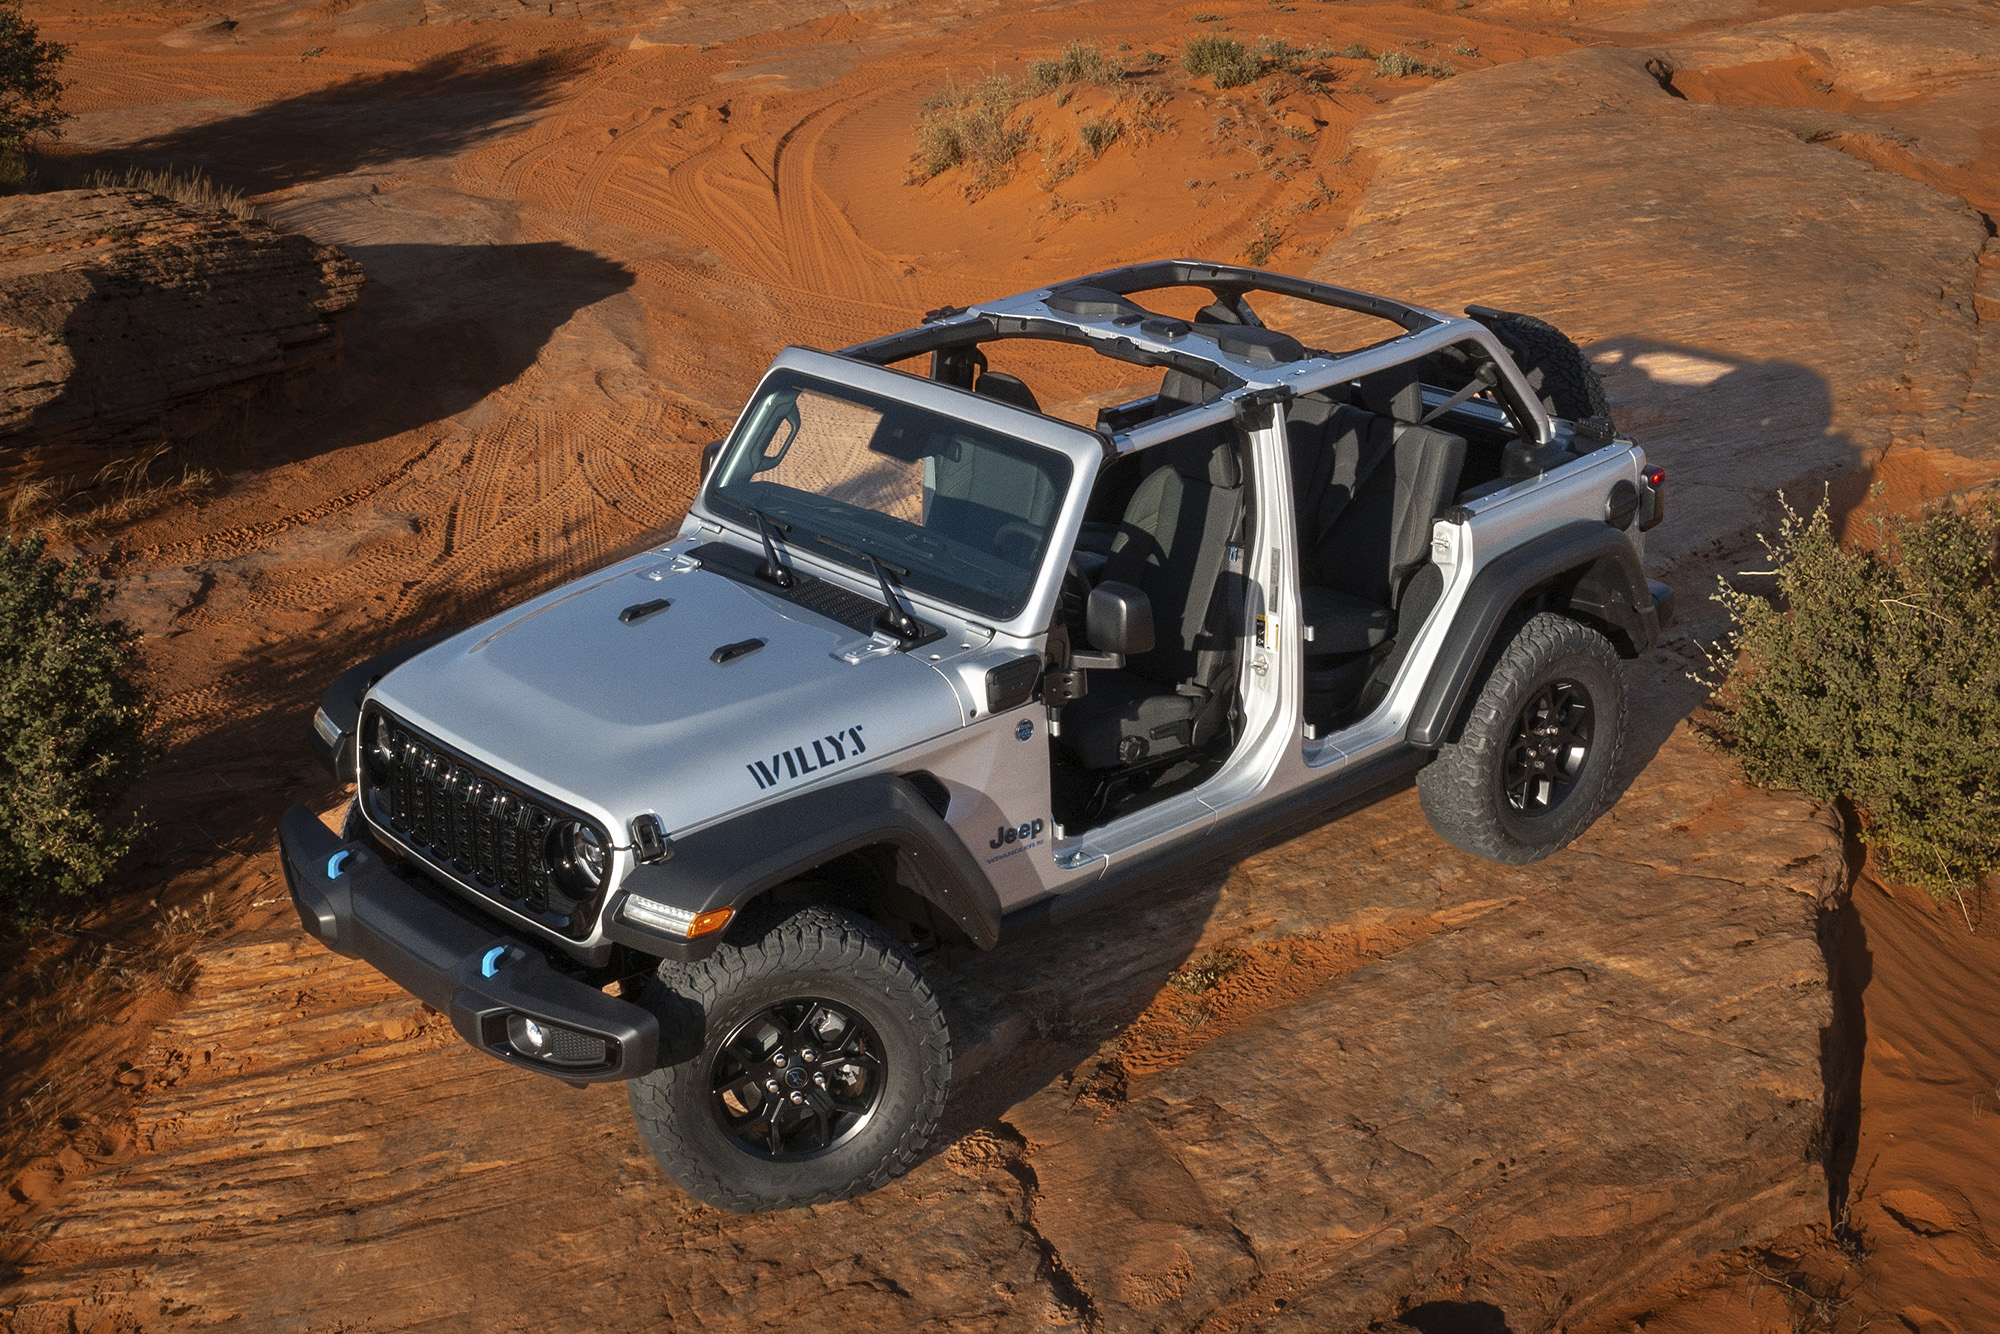 Jeep Wrangler bird's eye view of the boxy silver jeep parked in desert